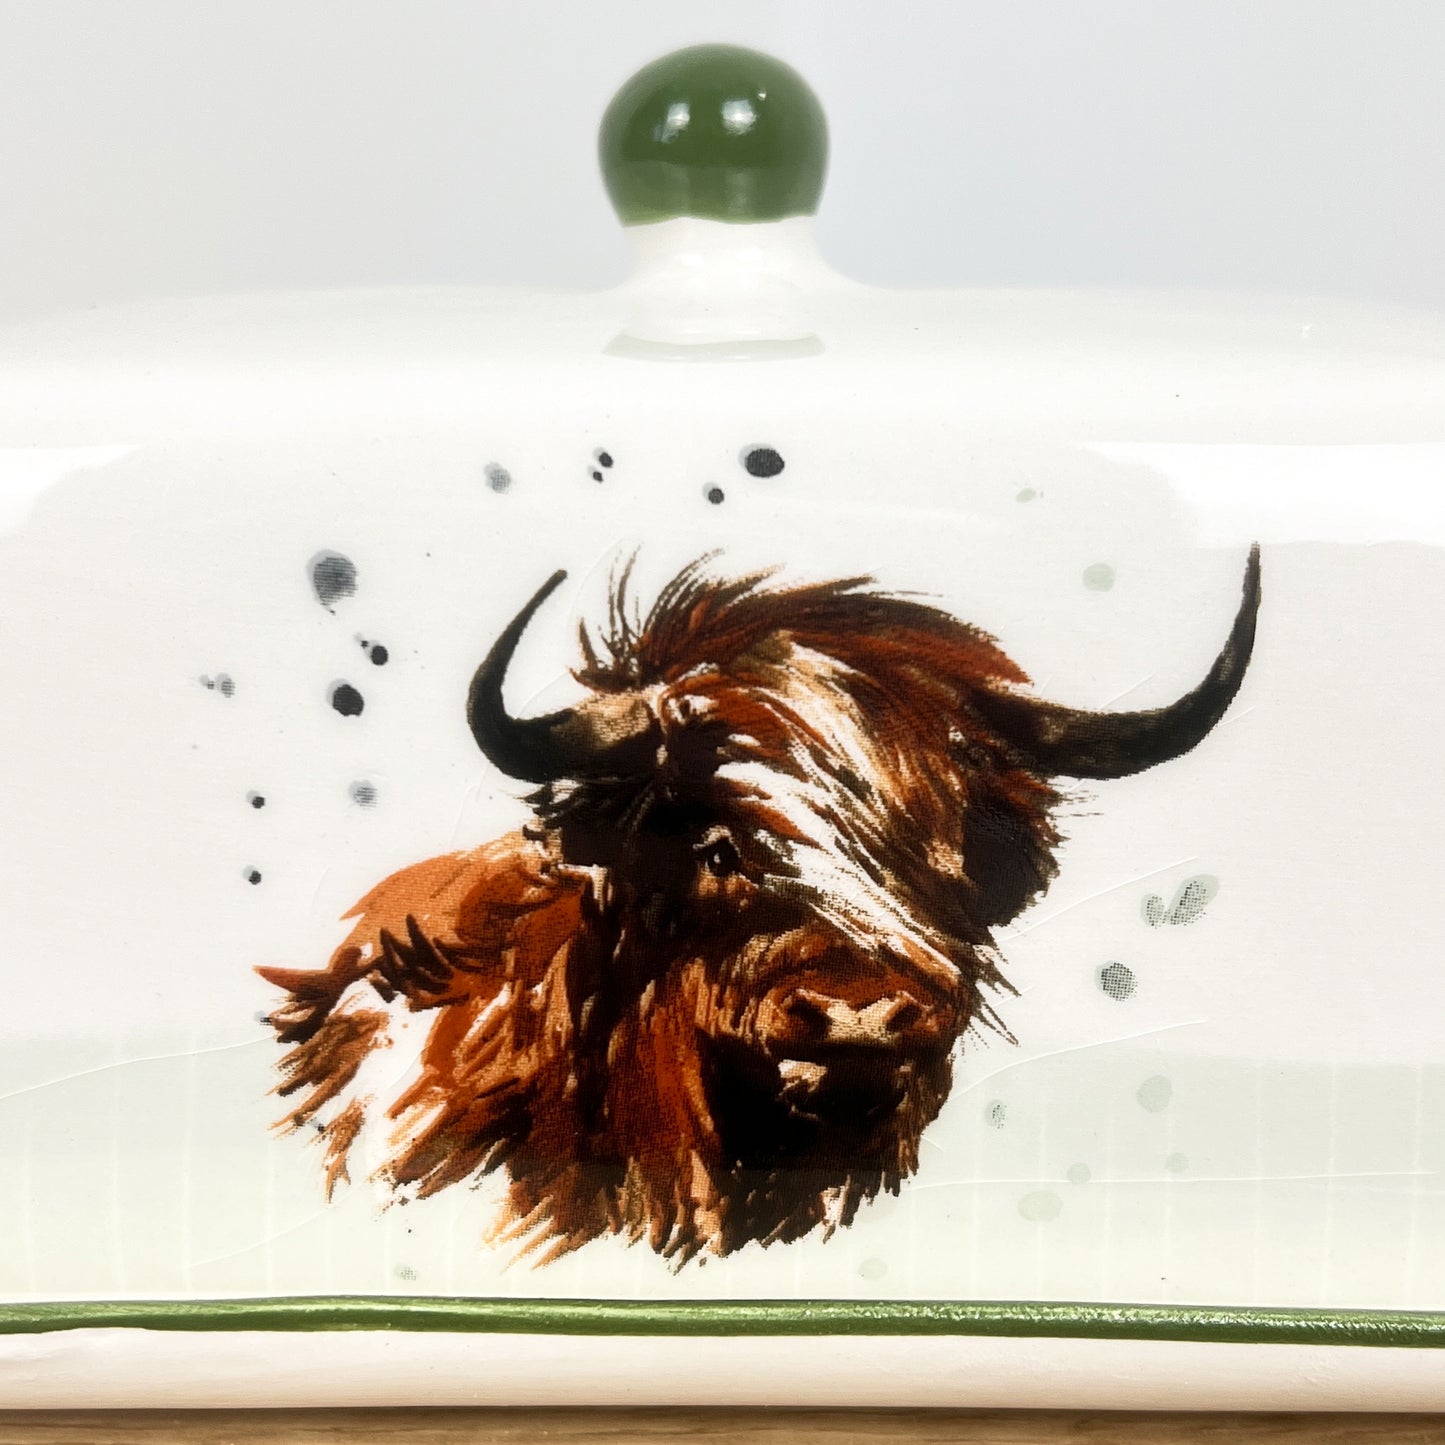 Highland Cow Butter Dish - Ceramic